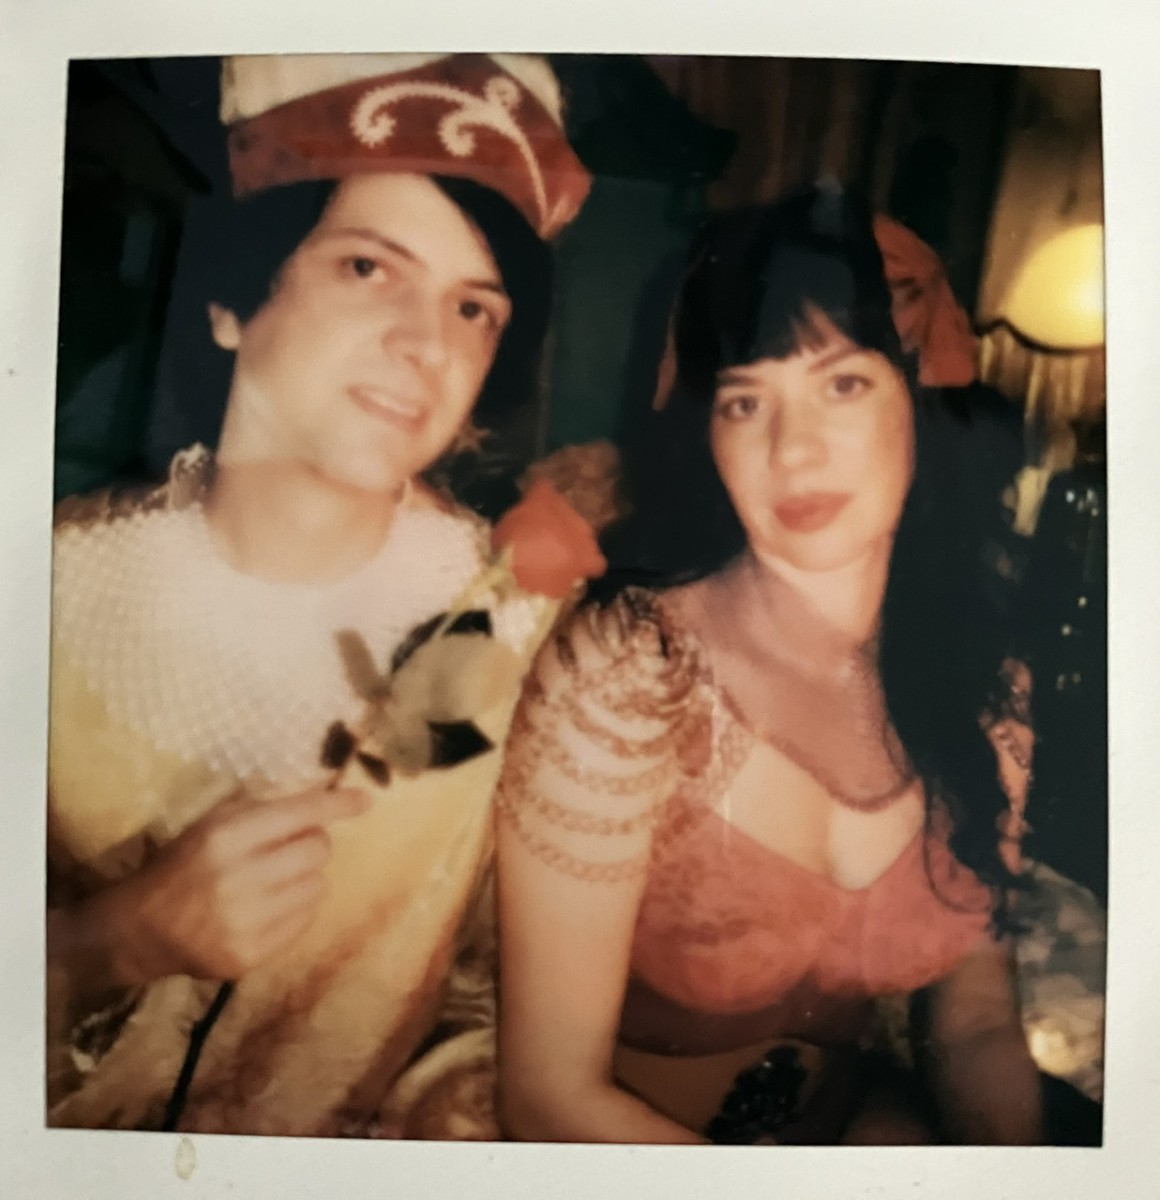 Polaroid photo of a young man wearing a crazy hat and holding a flower and a young woman with long, brown hair wearing a dress.